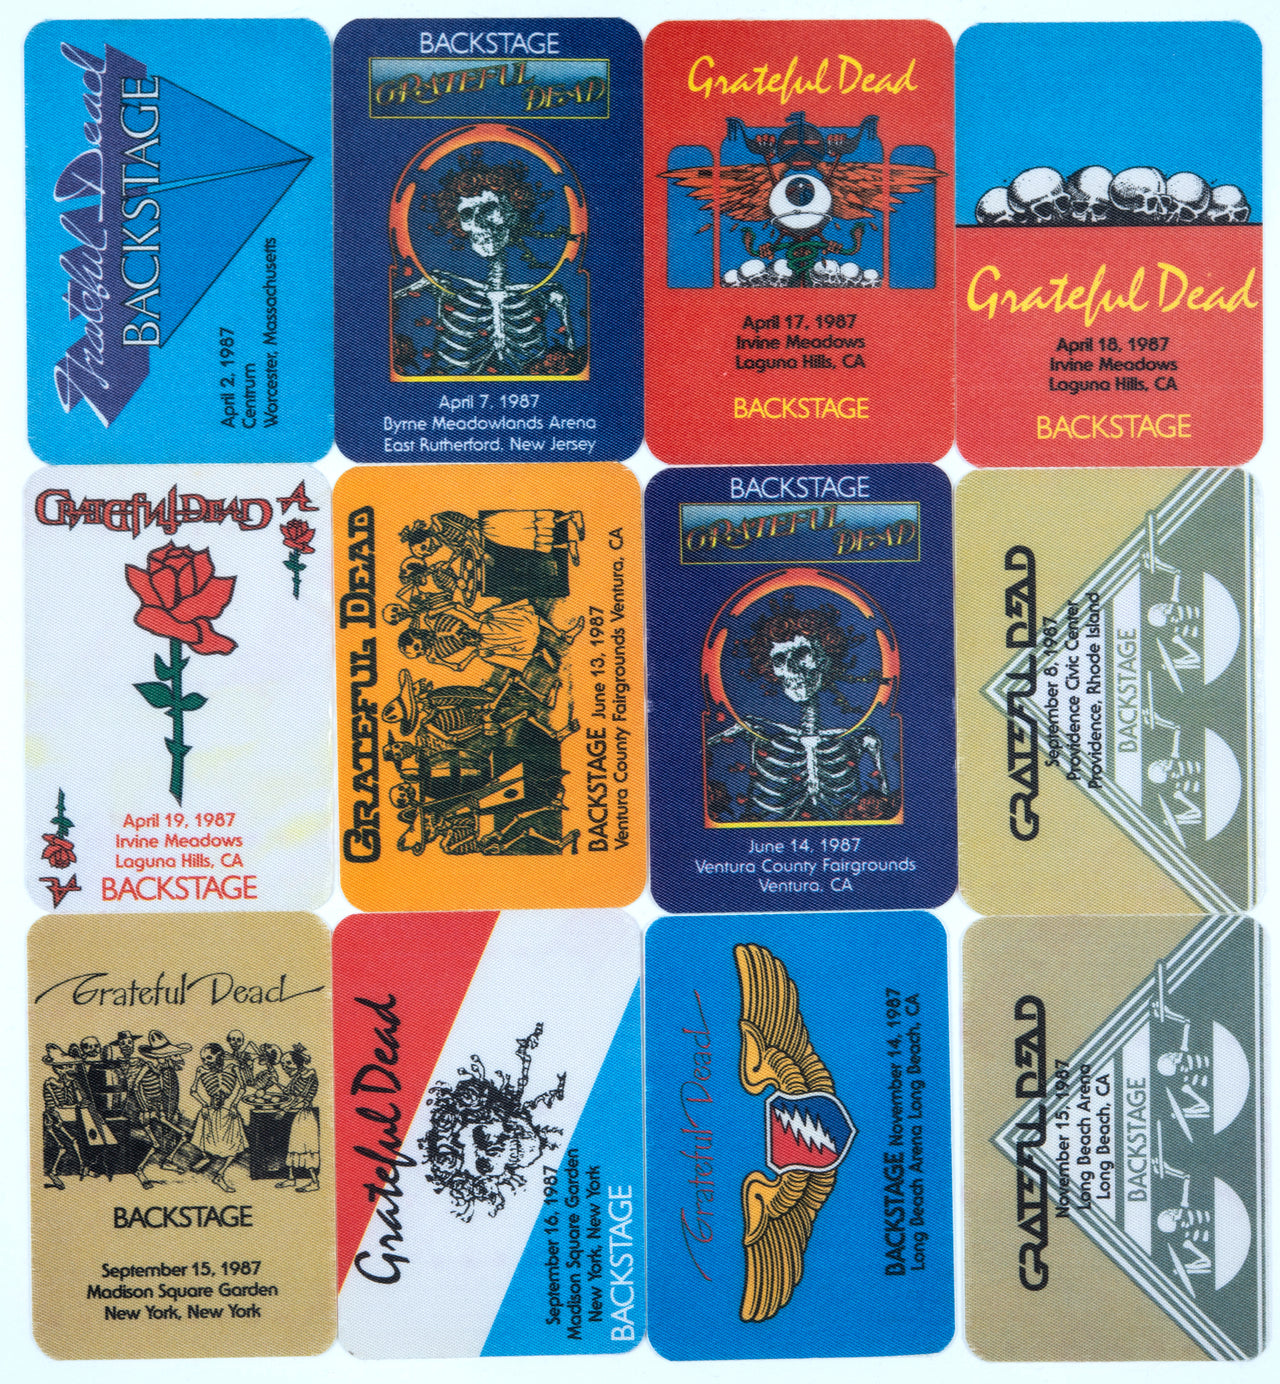 Grateful Dead Backstage Passes (4/2/1987 - 11/15/1987) from Dan Healy